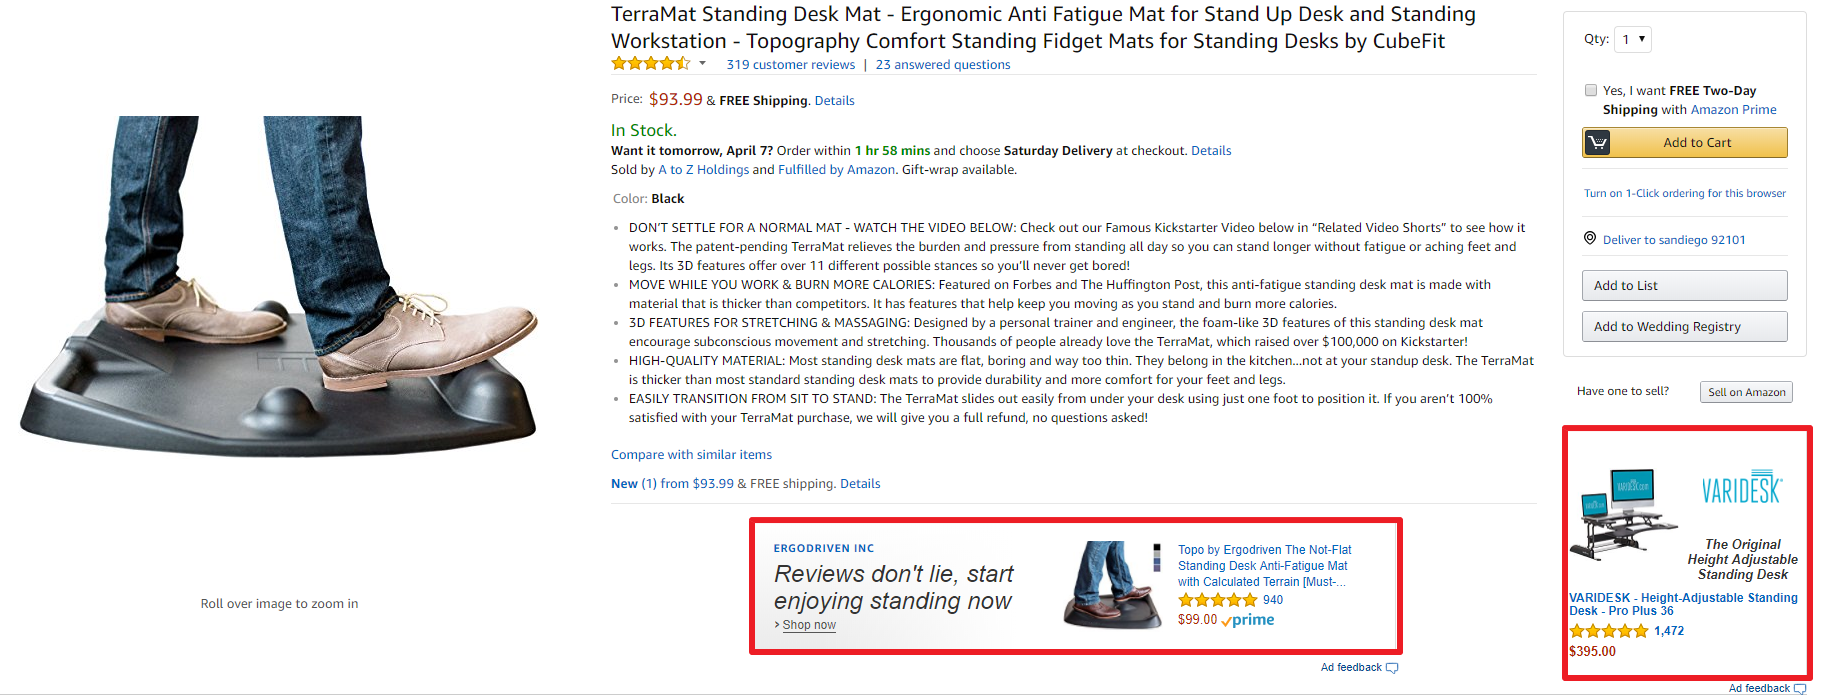 Screenshot showing a product page on amazon